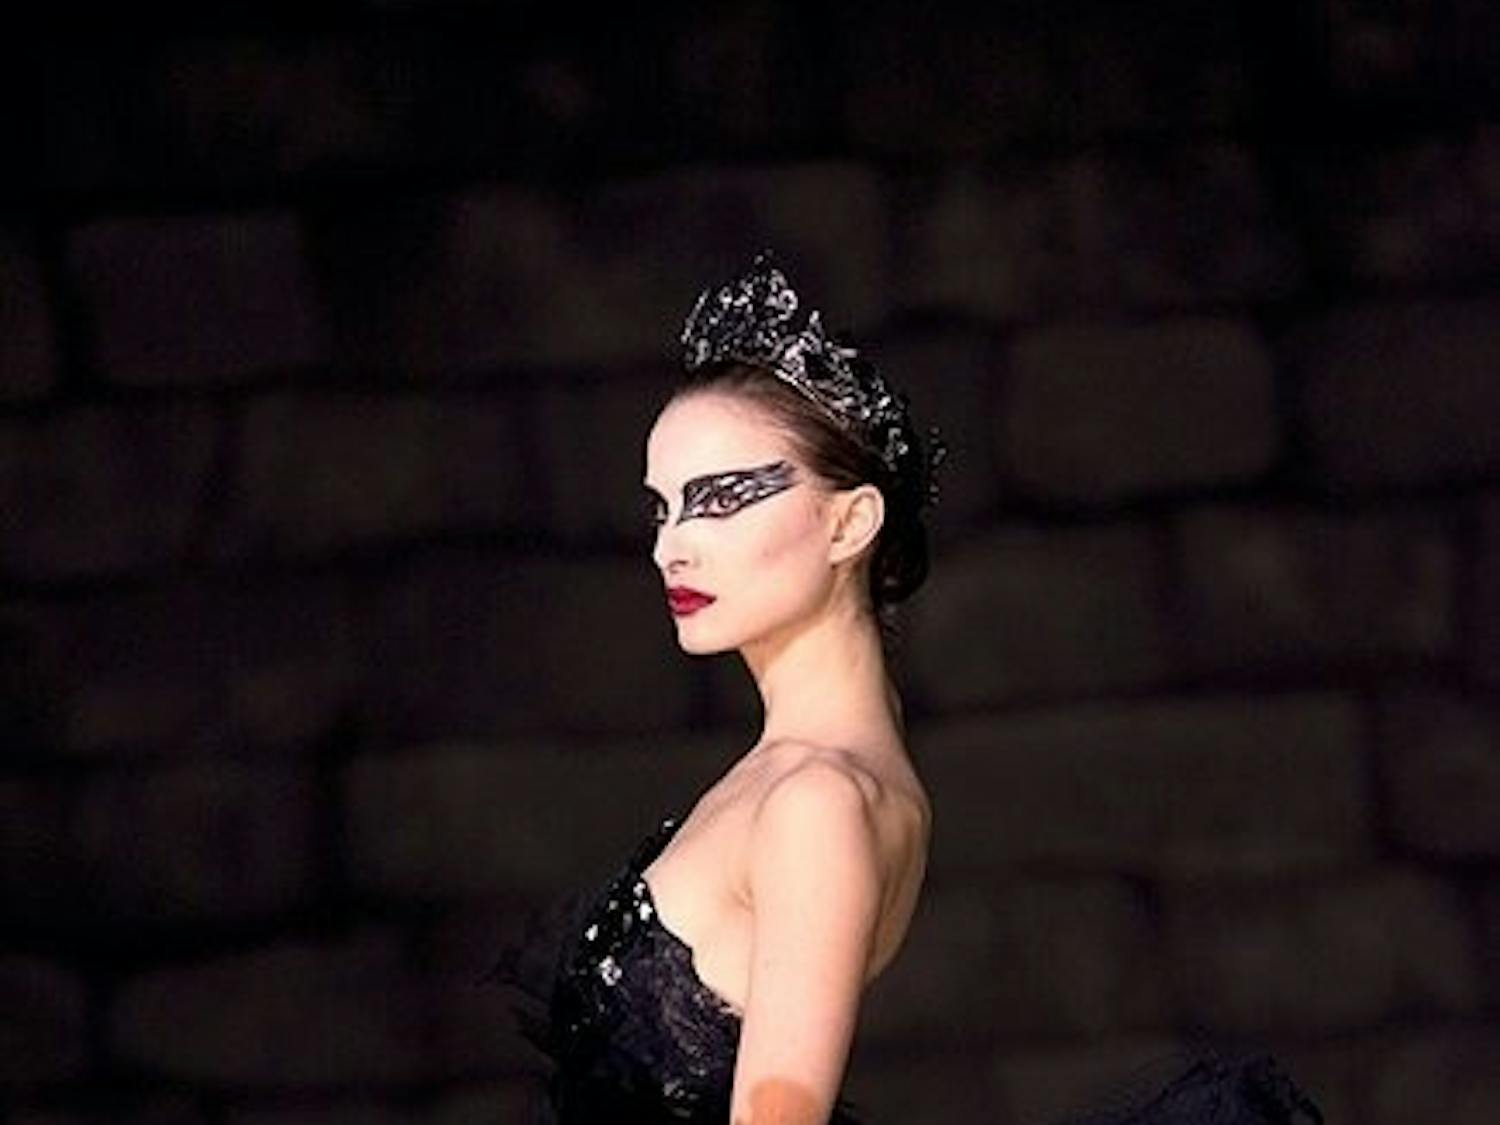 Calculation cuts effect of Aronofsky's 'Black Swan'